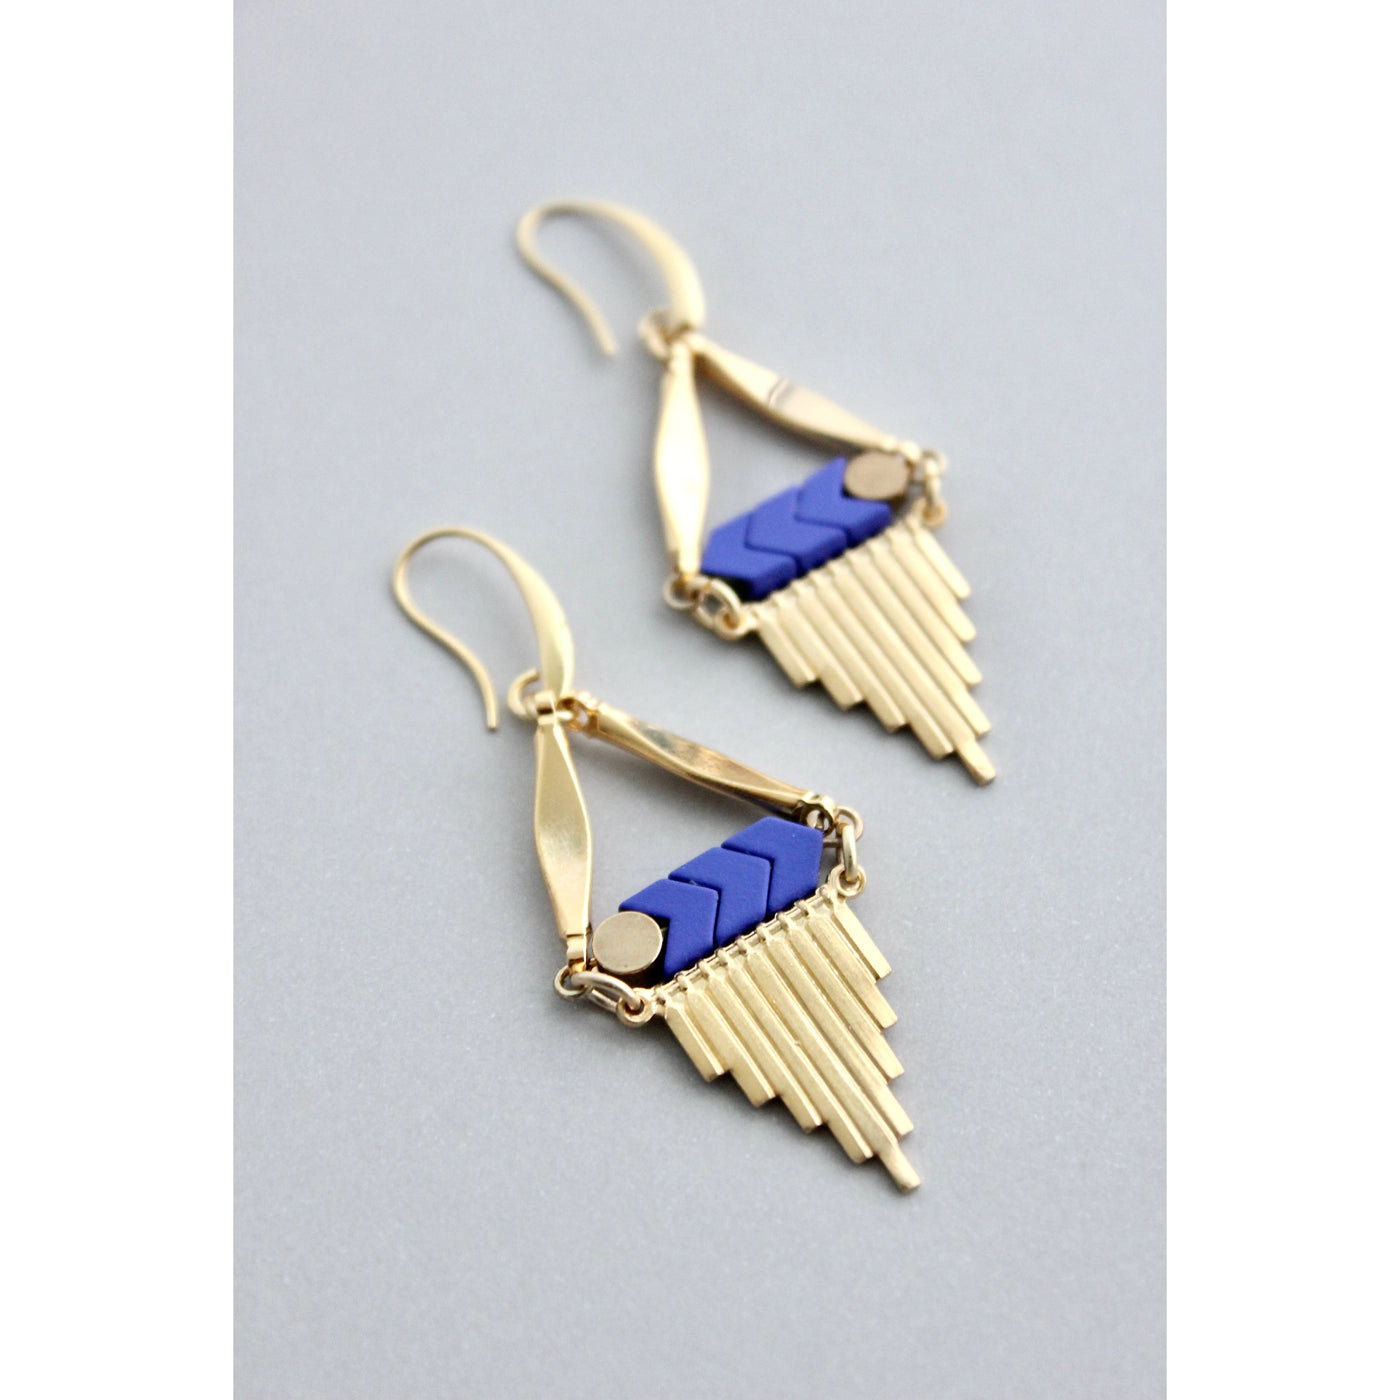 GNDE62 Blue and Brass Earrings